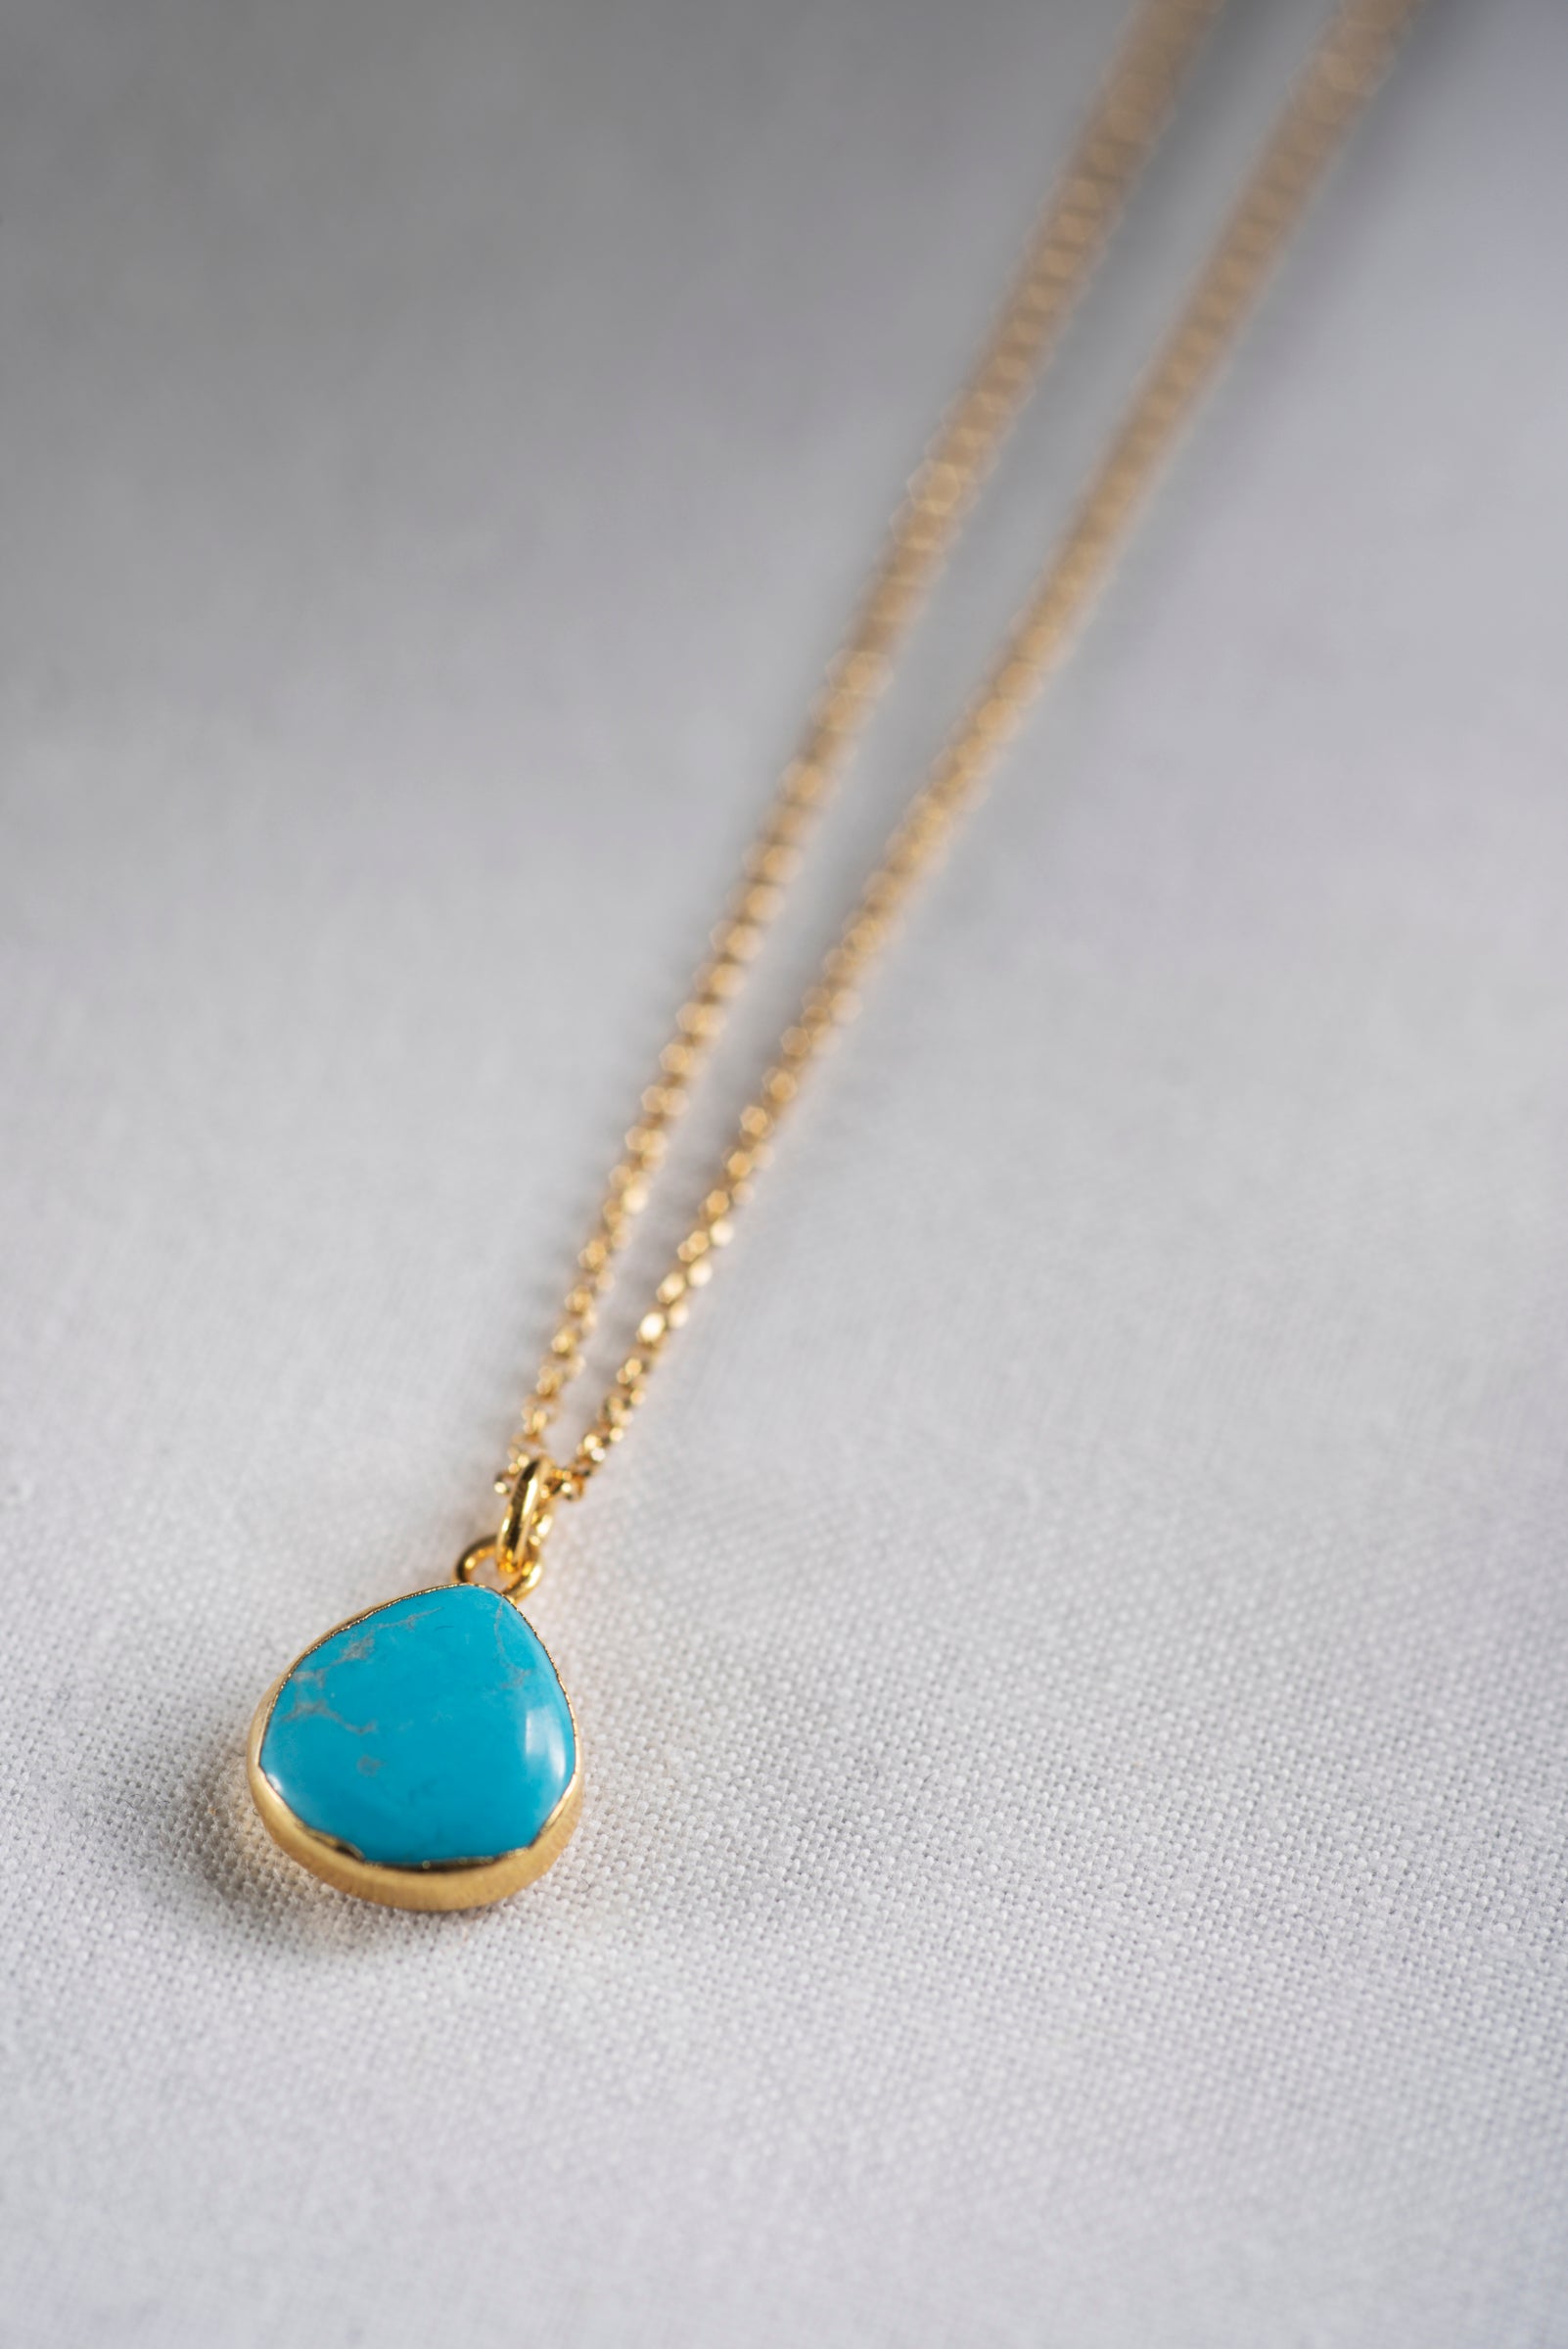 Turquoise Howlite Necklace from One Dame Lane Handmade Jewellery